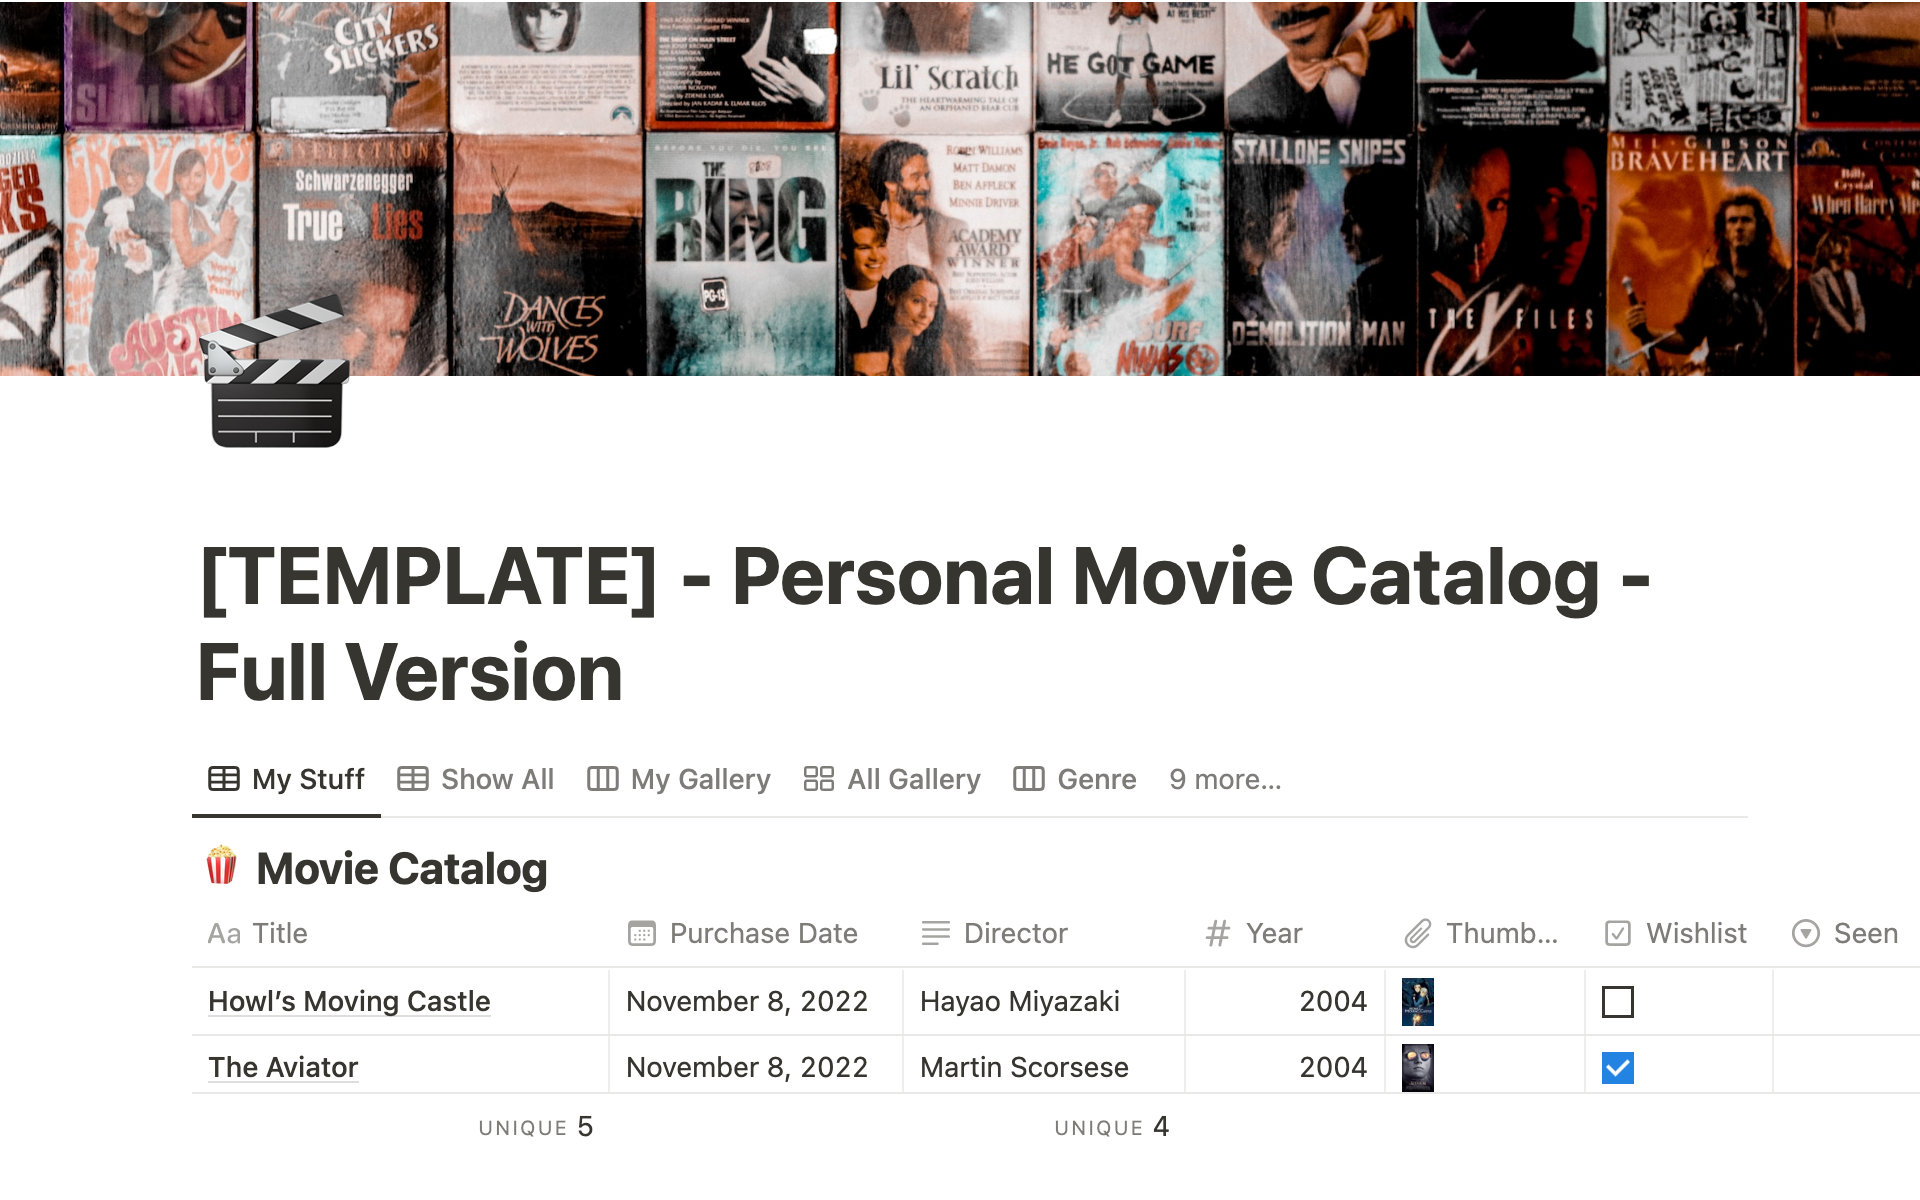 Organize and track your movie collection with beautiful galleries and lists.